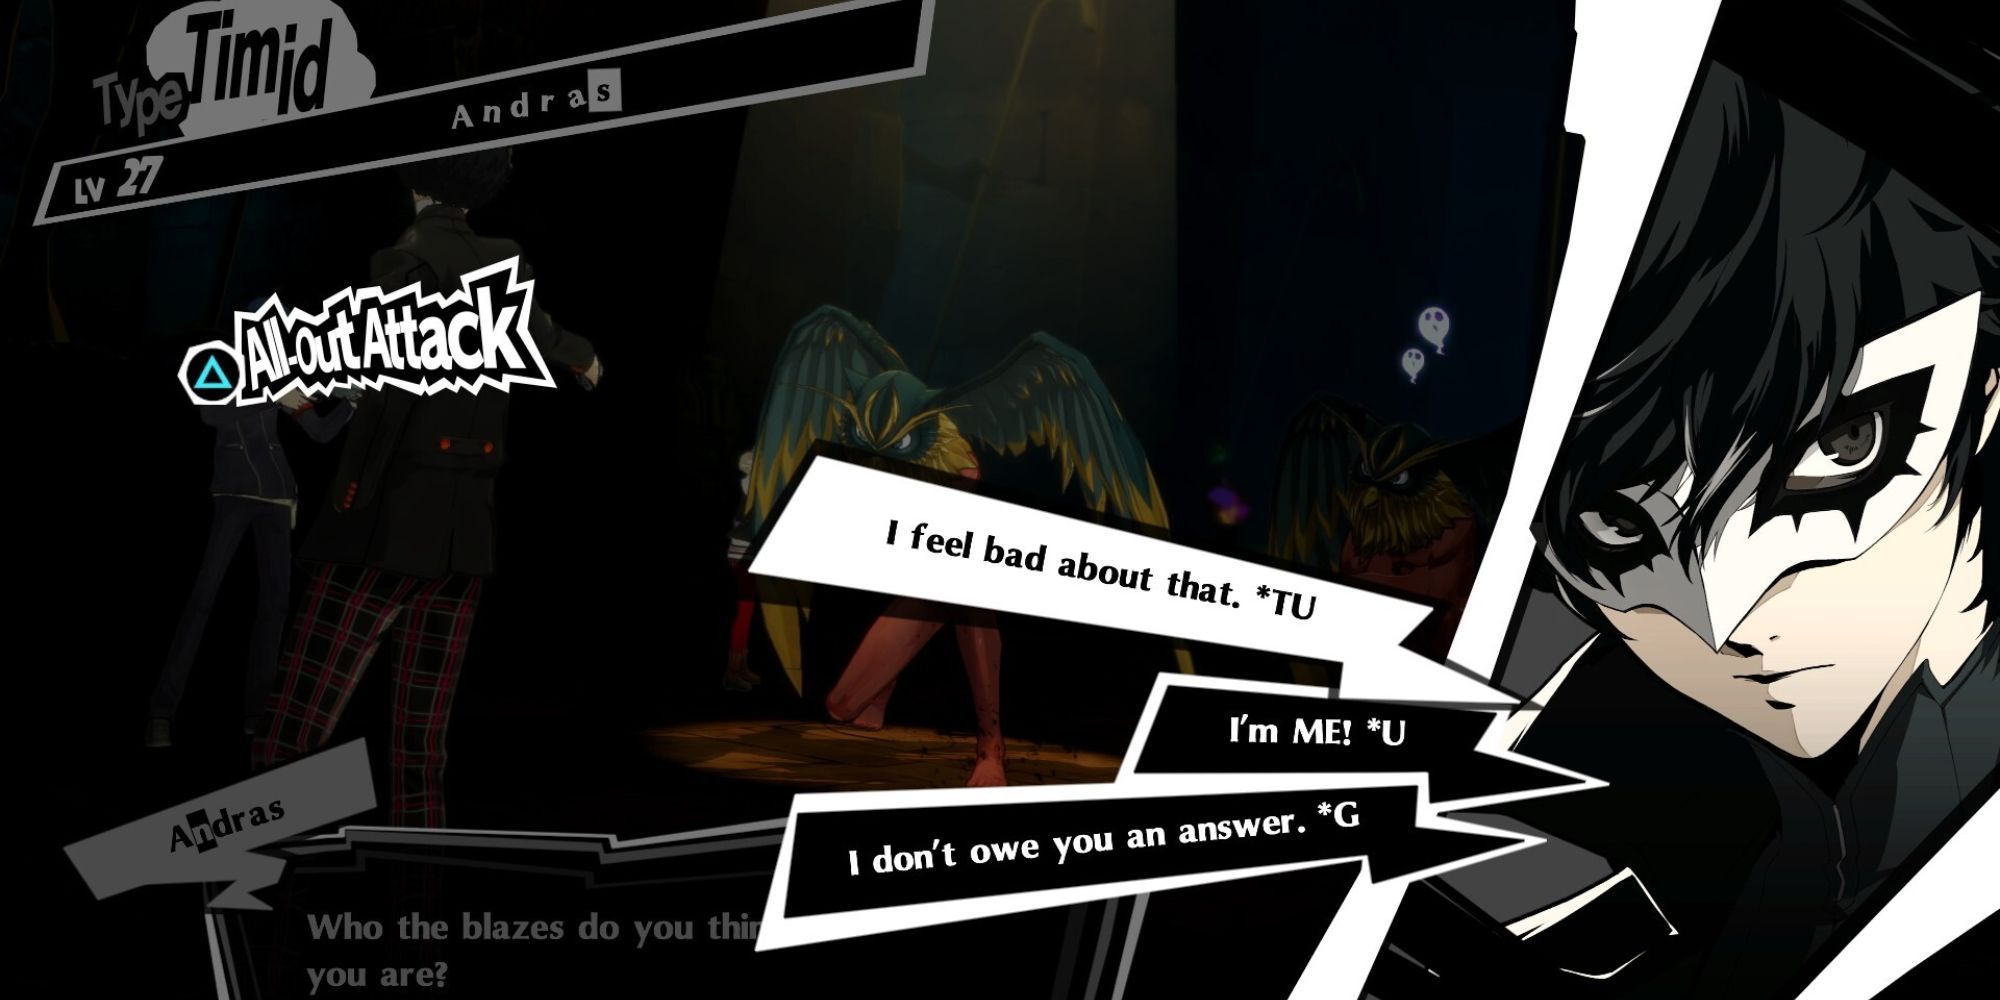 Persona 5 Royal - Modded screenshot shows the answers to Negotiating with Shadows as Joker talks to them